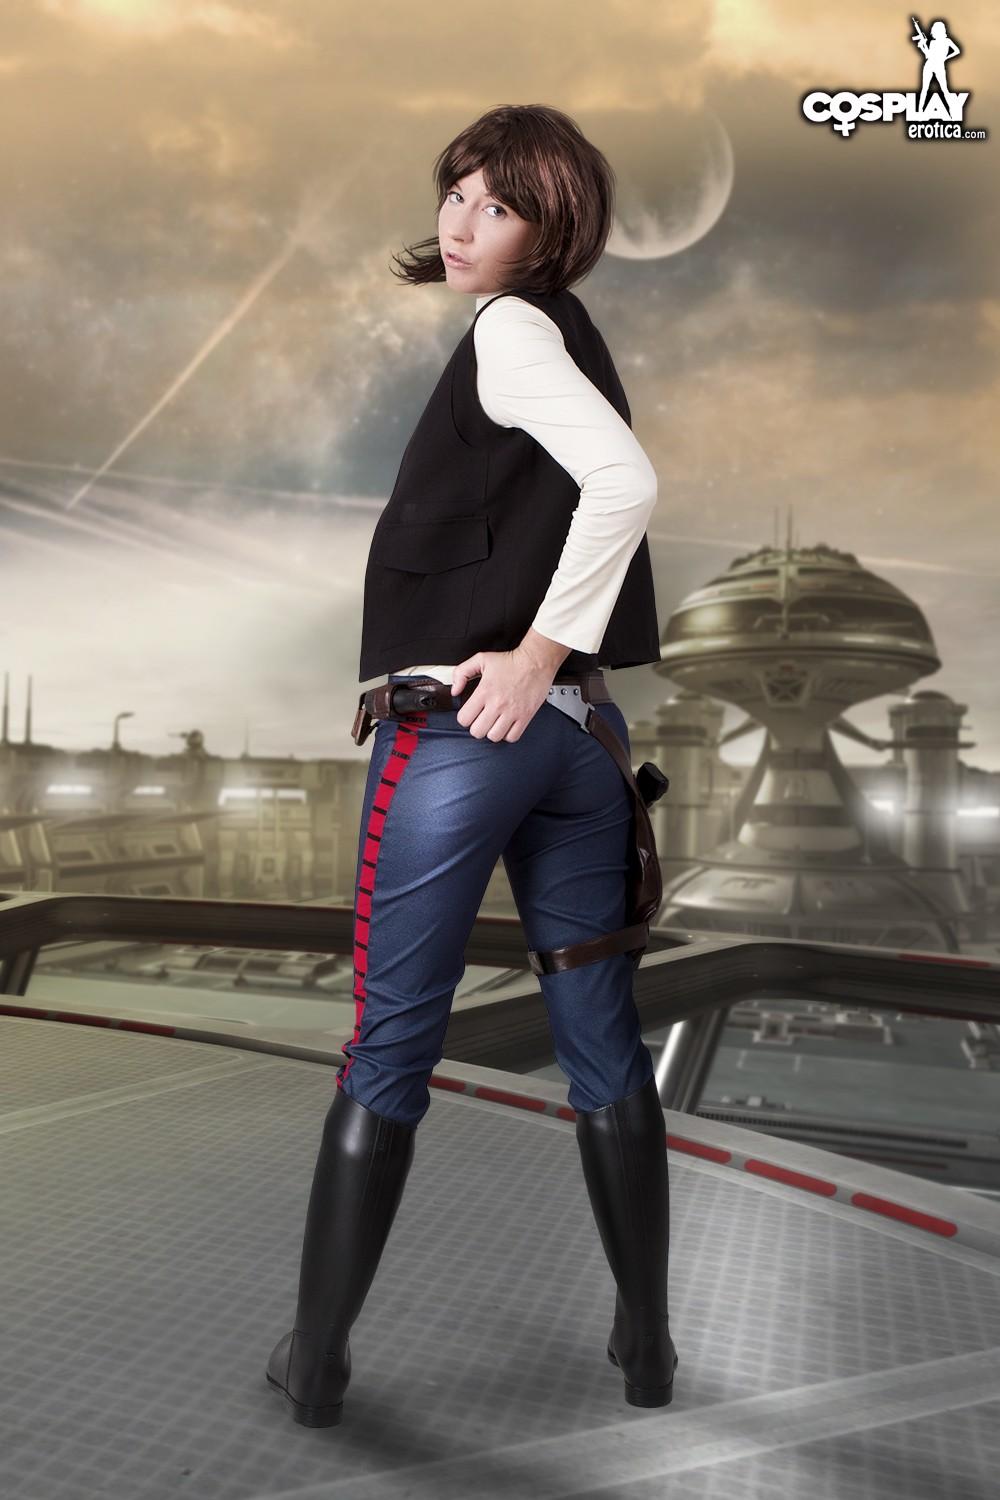 Cosplay girl Betsie dresses as the sexiest Han Solo I've ever seen #53438300